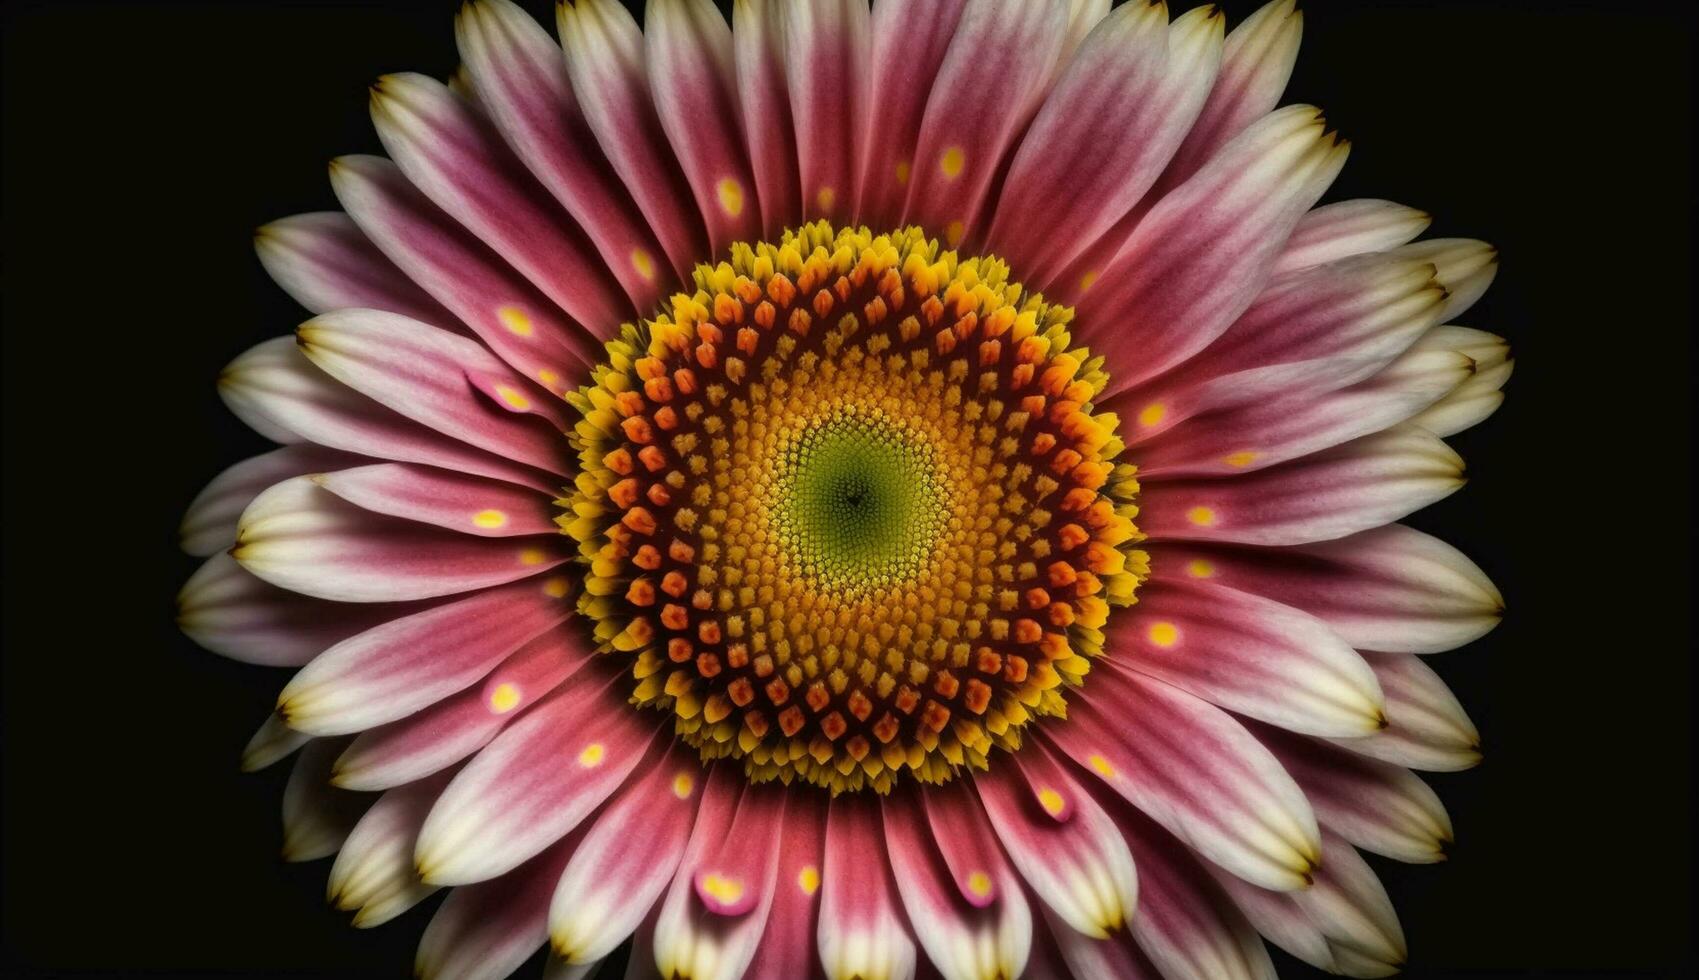 Nature beauty in bloom yellow daisy petals generated by AI photo